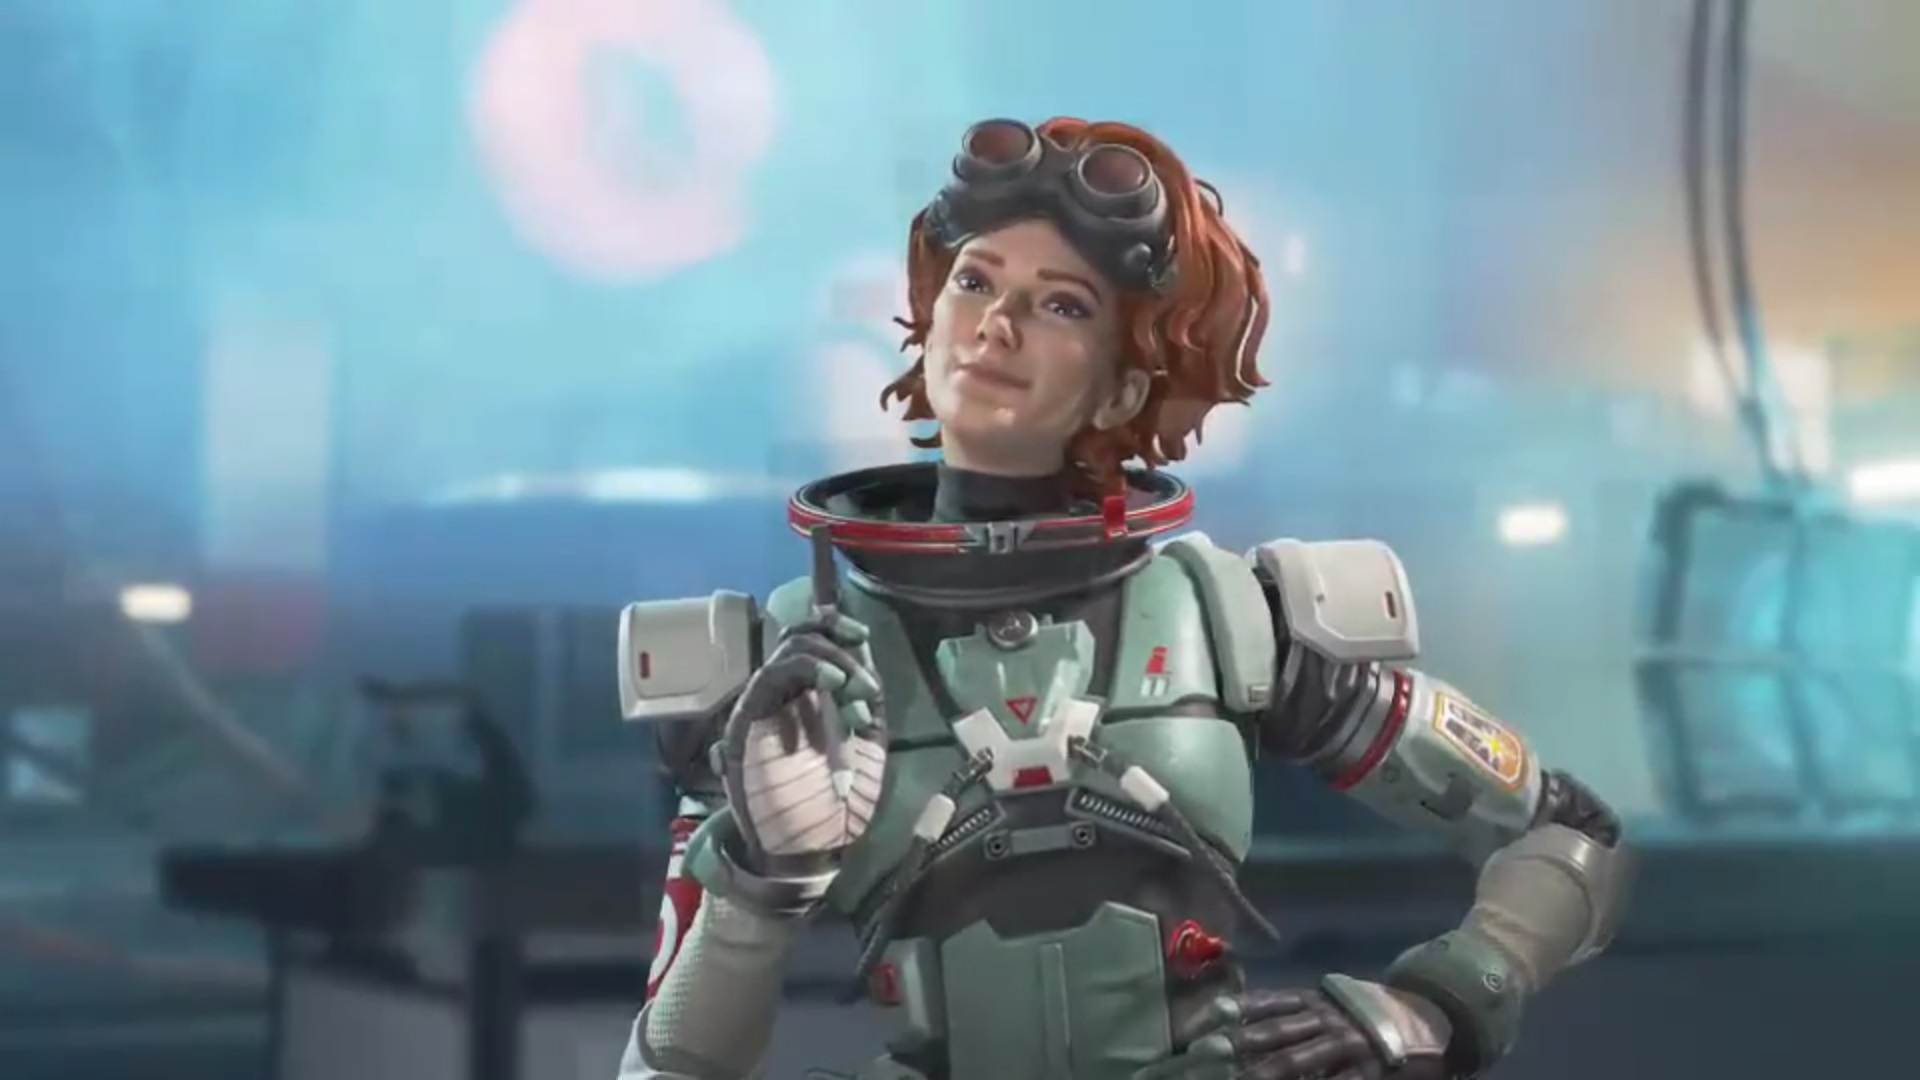 Apex Legends Horizon Guide: How to Play, Abilities, More